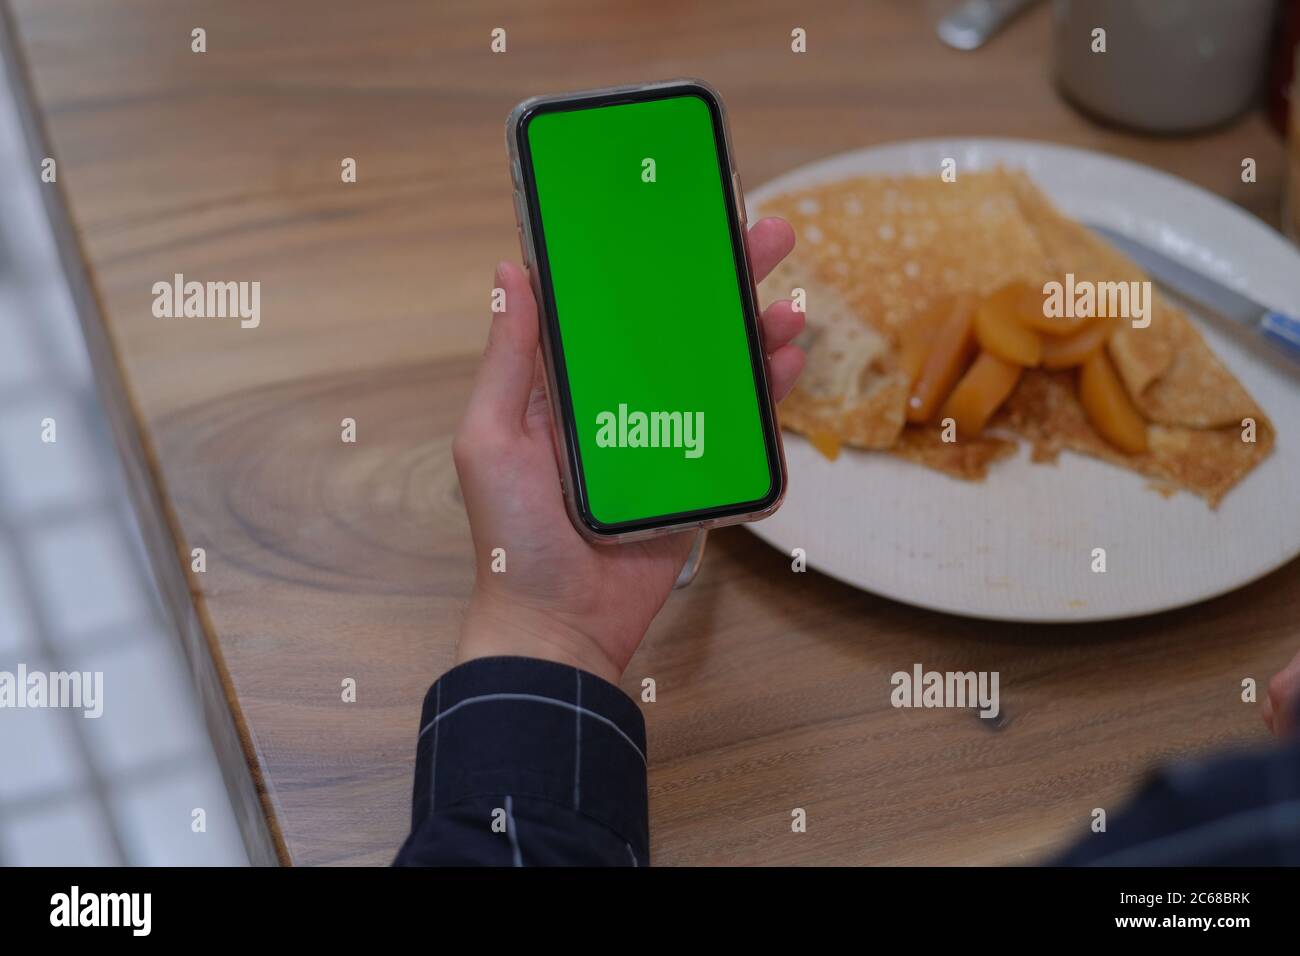 over shoulder of hand holding green screen smartphone. Blur food in plate on wooden table. Stock Photo